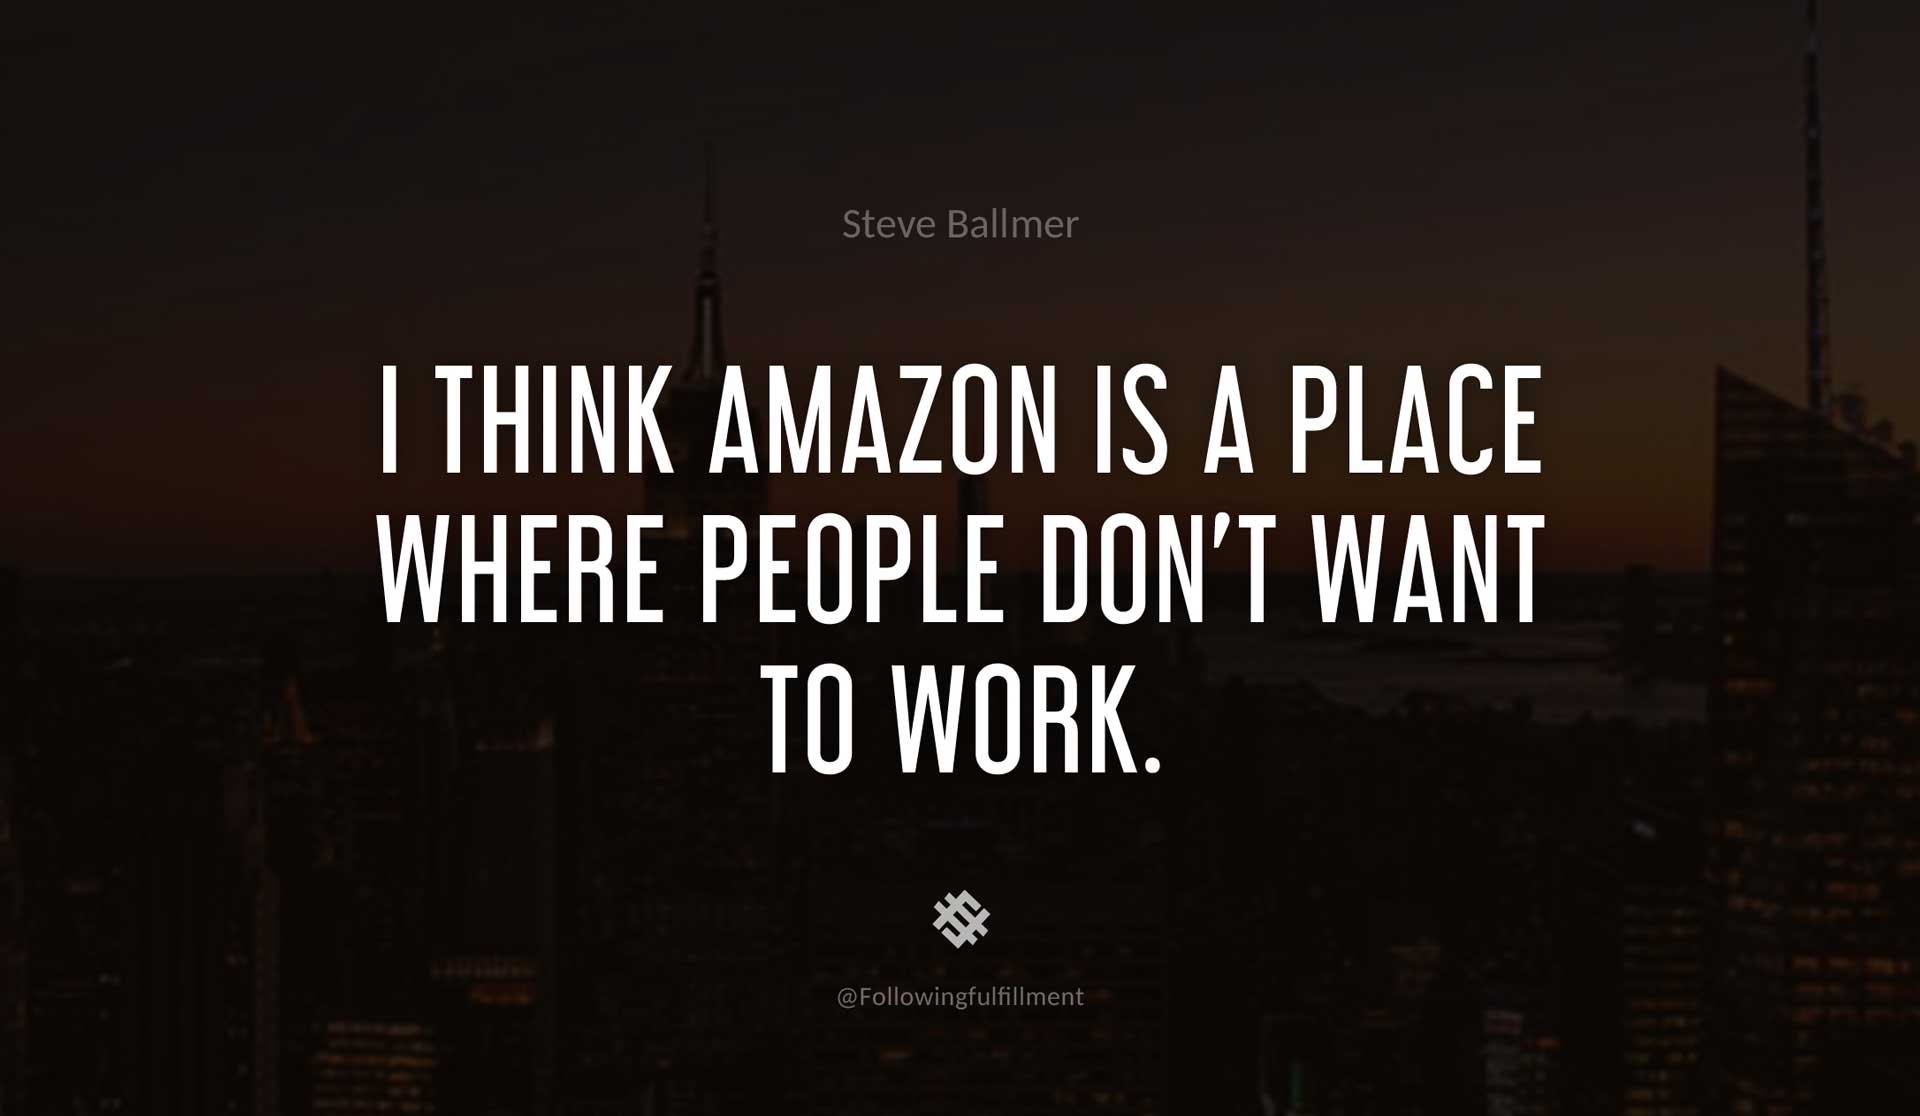 I-think-Amazon-is-a-place-where-people-don't-want-to-work.-STEVE-BALLMER-Quote.jpg